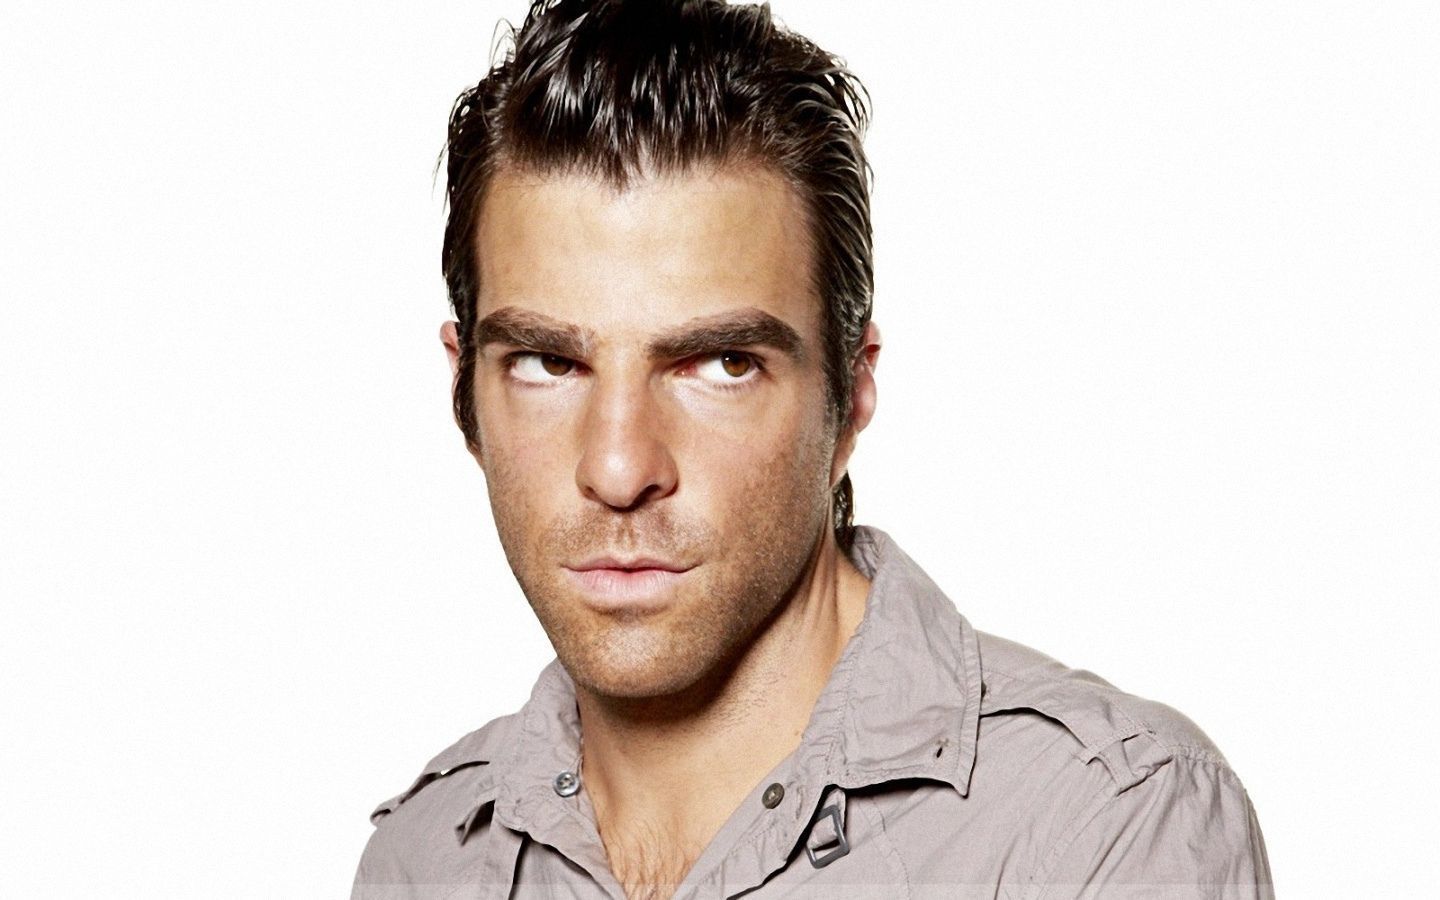 Zachary Quinto Wallpaper 1440x900 Wallpapers, 1440x900 Wallpapers